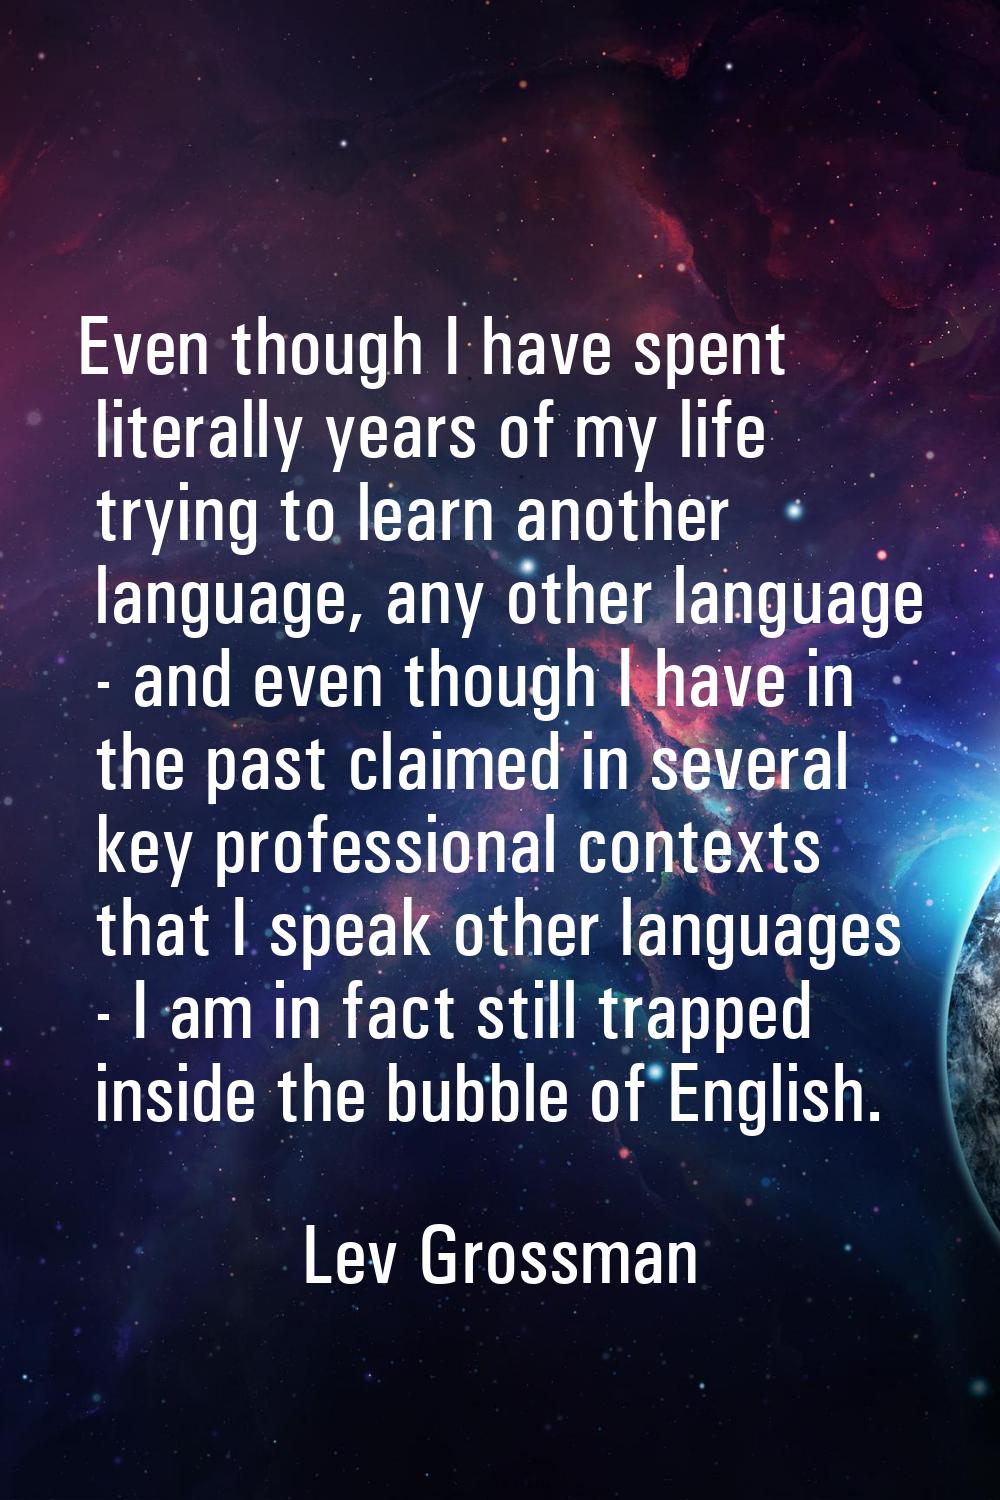 Even though I have spent literally years of my life trying to learn another language, any other lan